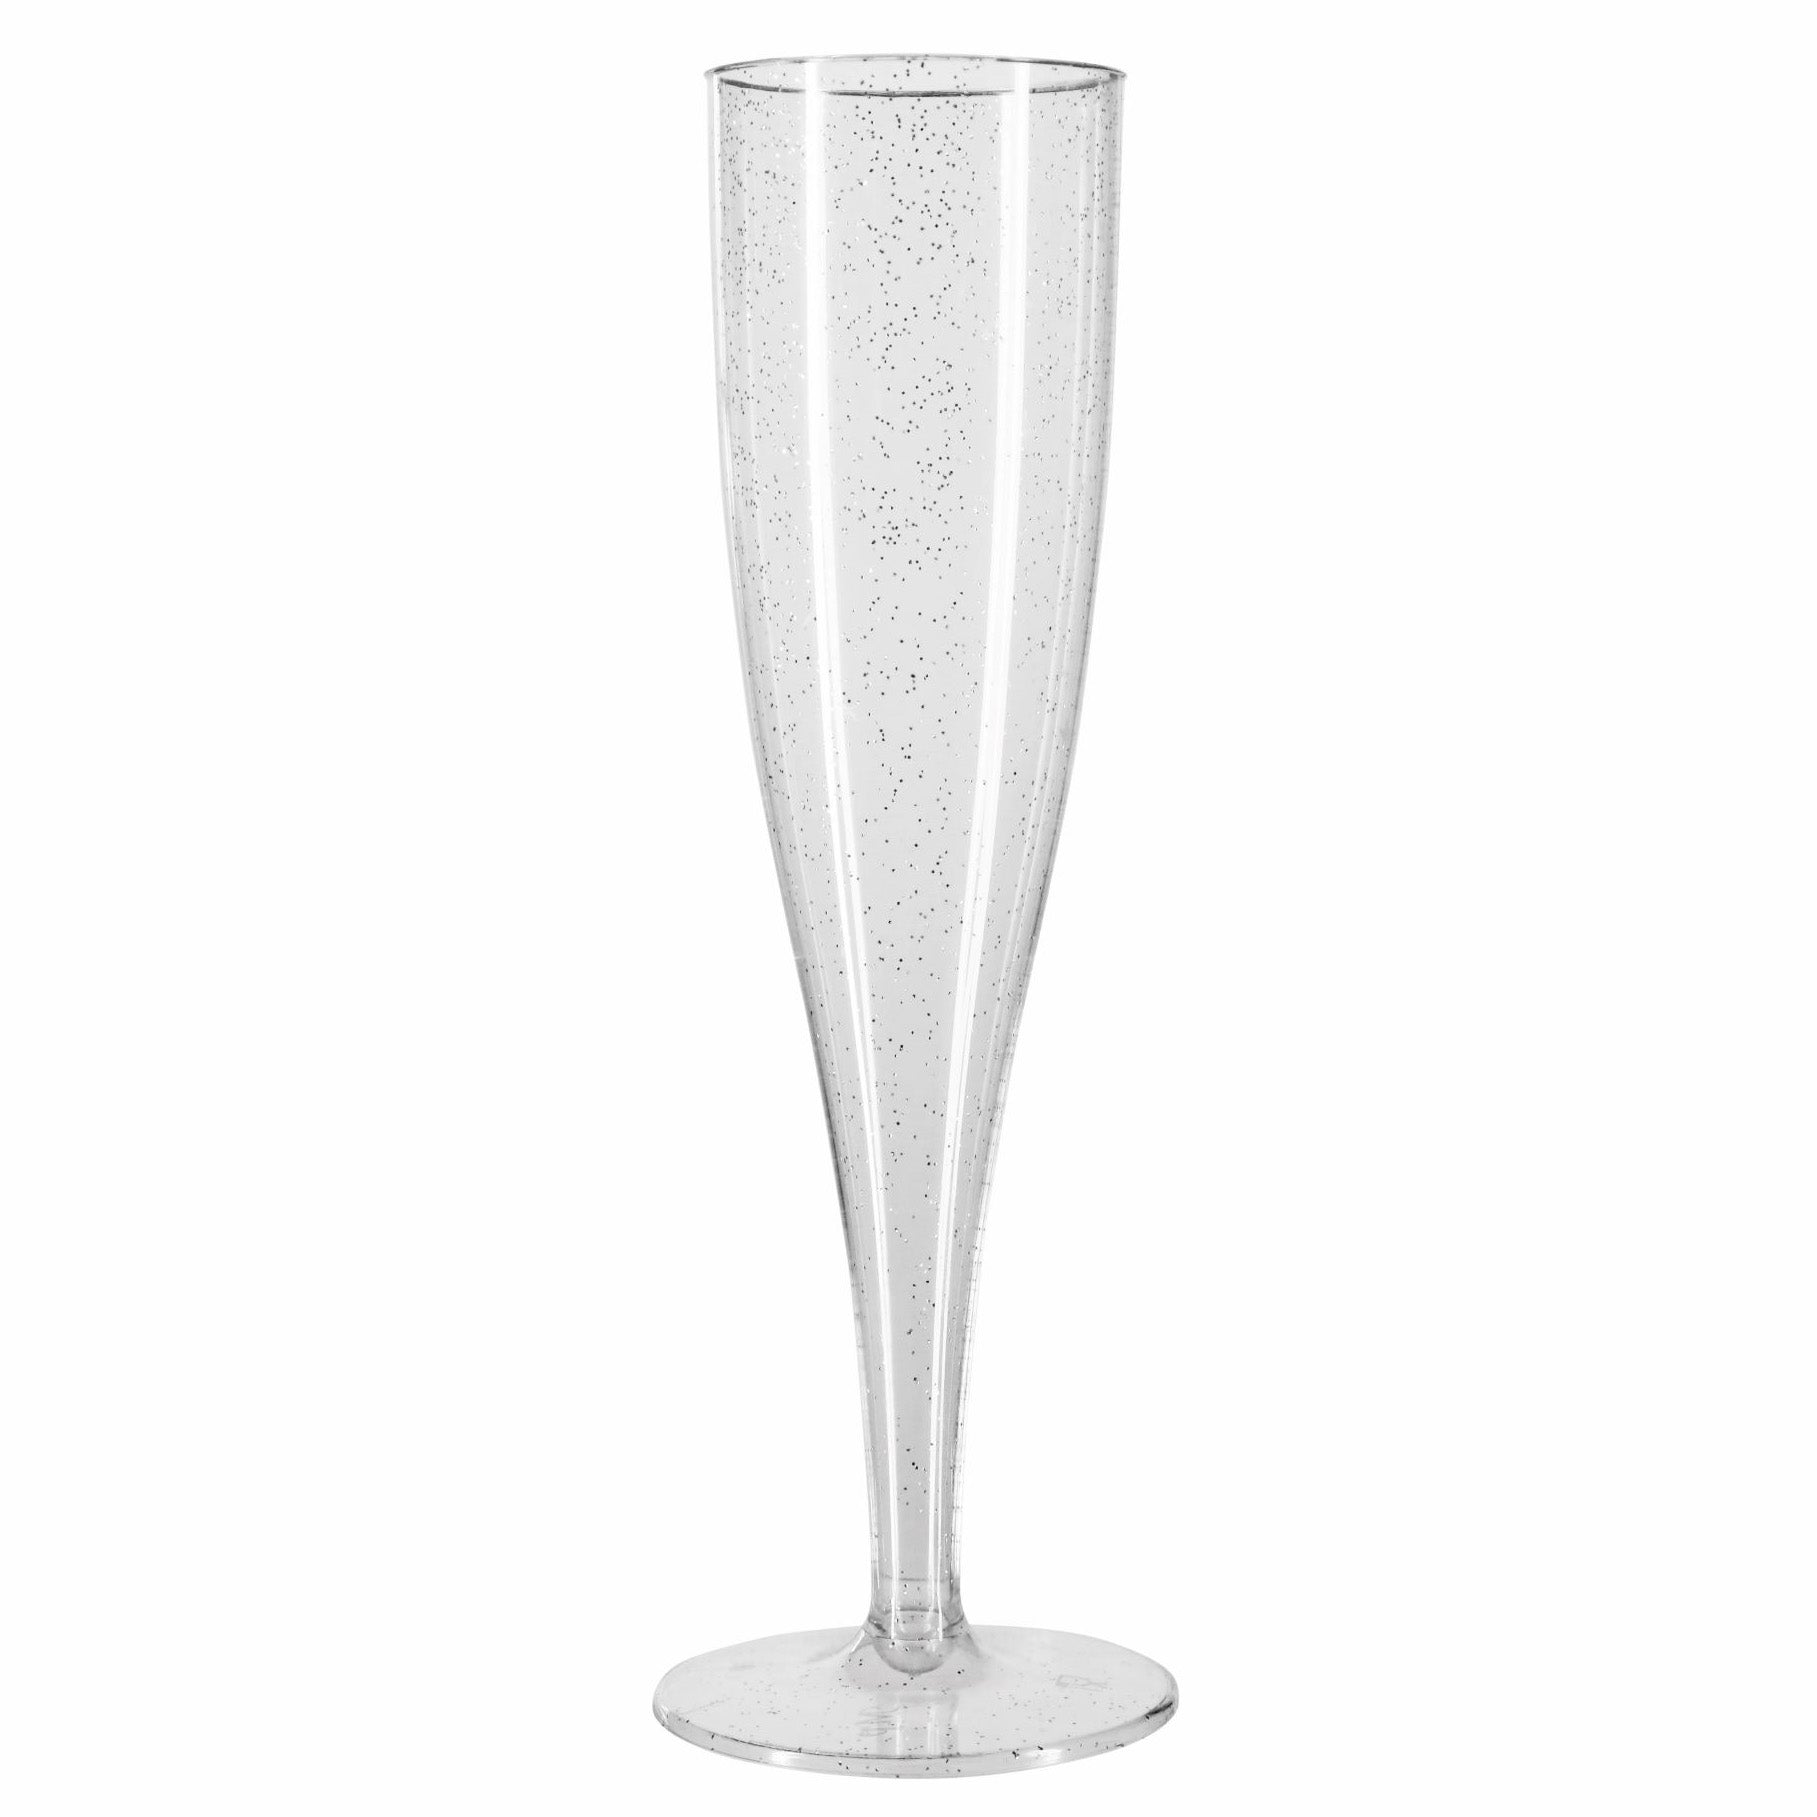 10 x Silver Glitter Prosecco Flutes - 175ml Plastic Disposable Champagne Glasses - One Piece (Pack of 10) Anniversaries, Weddings, Christmas-5056020179719-PCUP-CHAMP-SG-Product Pro-Glitter Champagne Glasses, Glitter Flutes, Glitter Glasses, Silver, Silver Champagne Glasses, Silver Glitter, Silver Prosecco Flutes